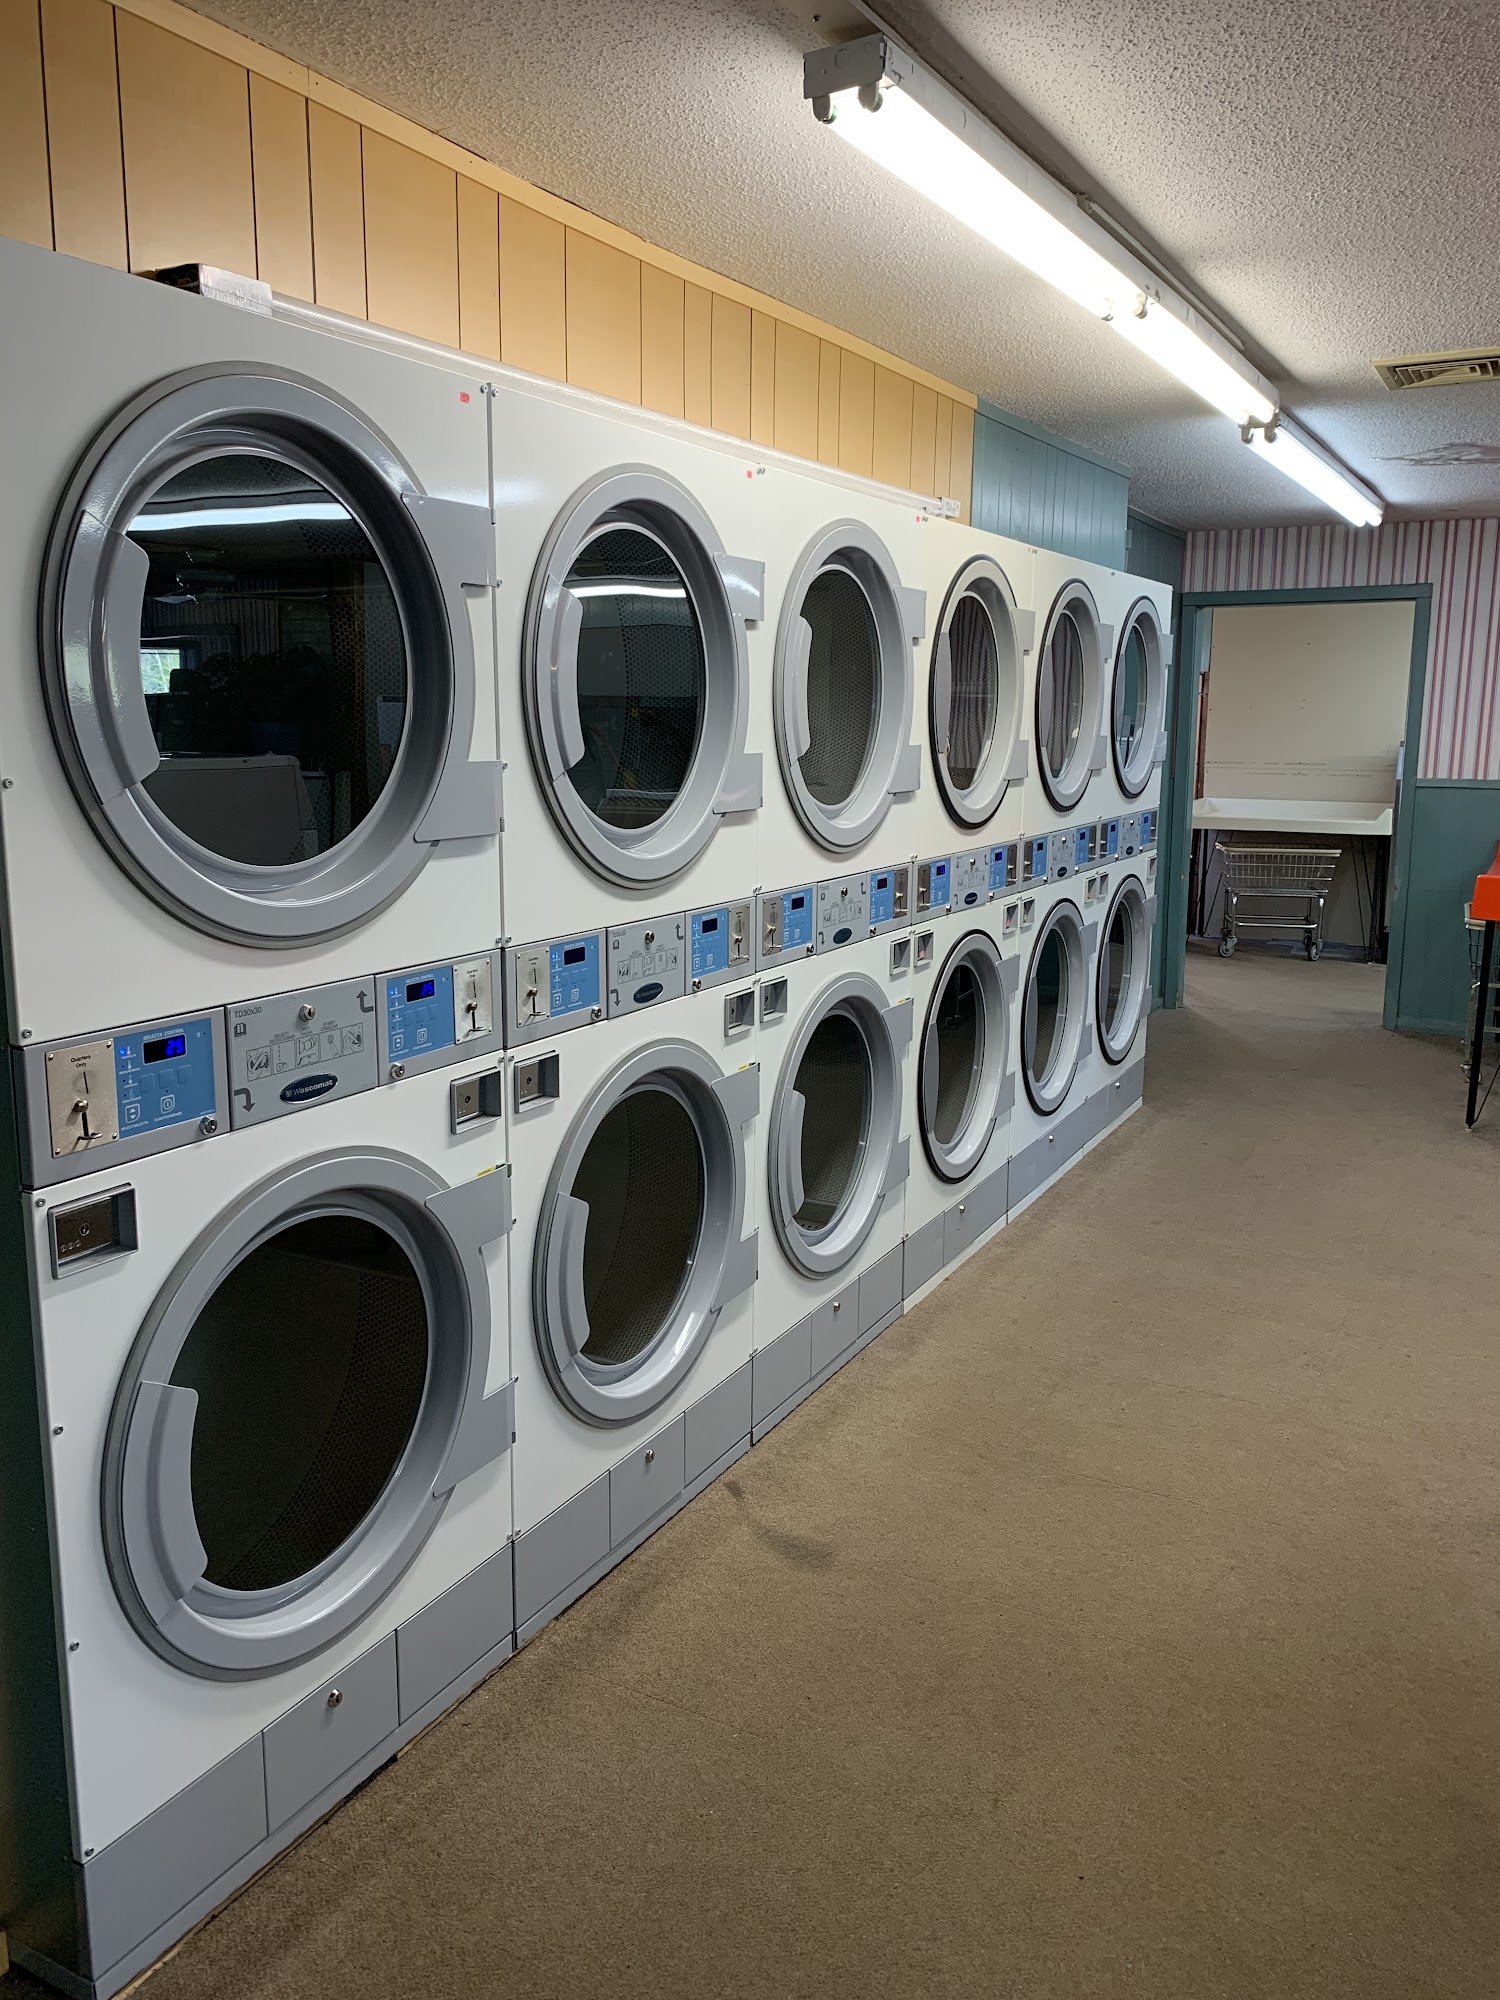 Airport Soap & Suds Laundromat 319 Boston Post Rd, North Windham Connecticut 06256